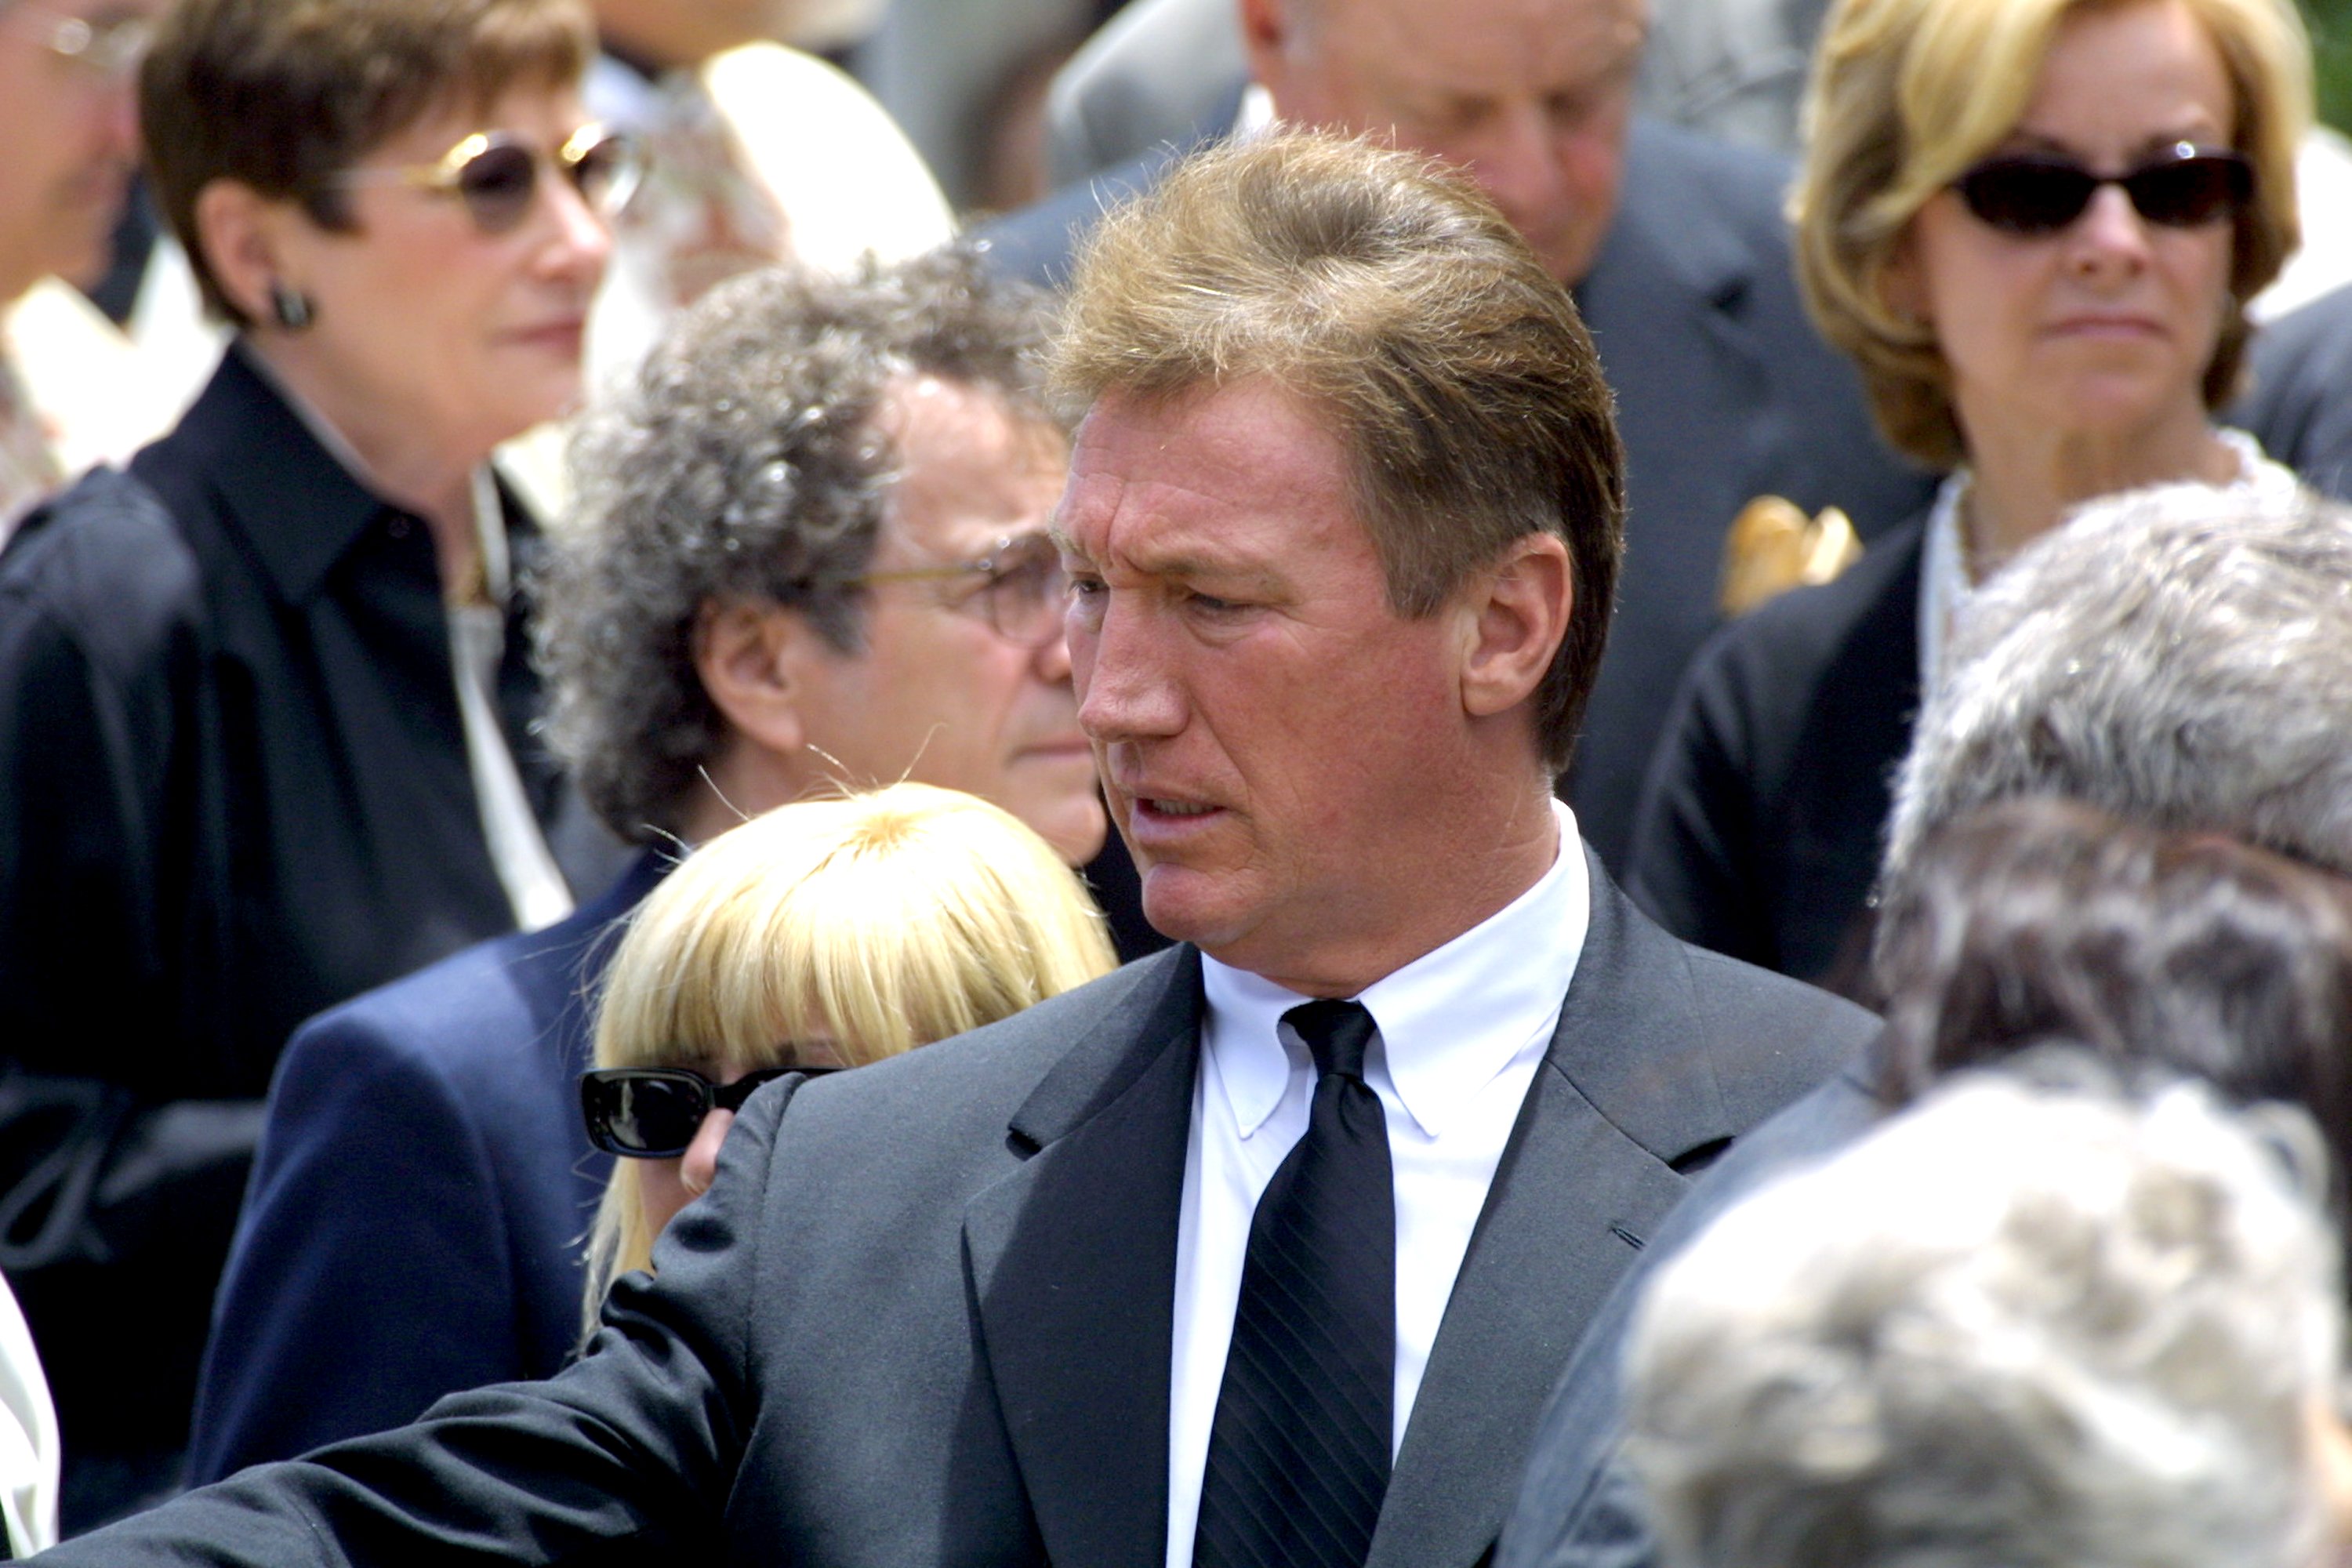 Alan Autry walks through the crowd after attending the funeral of actor Carroll O''Connor on June 26, 2001, at St. Paul The Apostle Church in West Los Angeles, CA. | Source: Getty Images